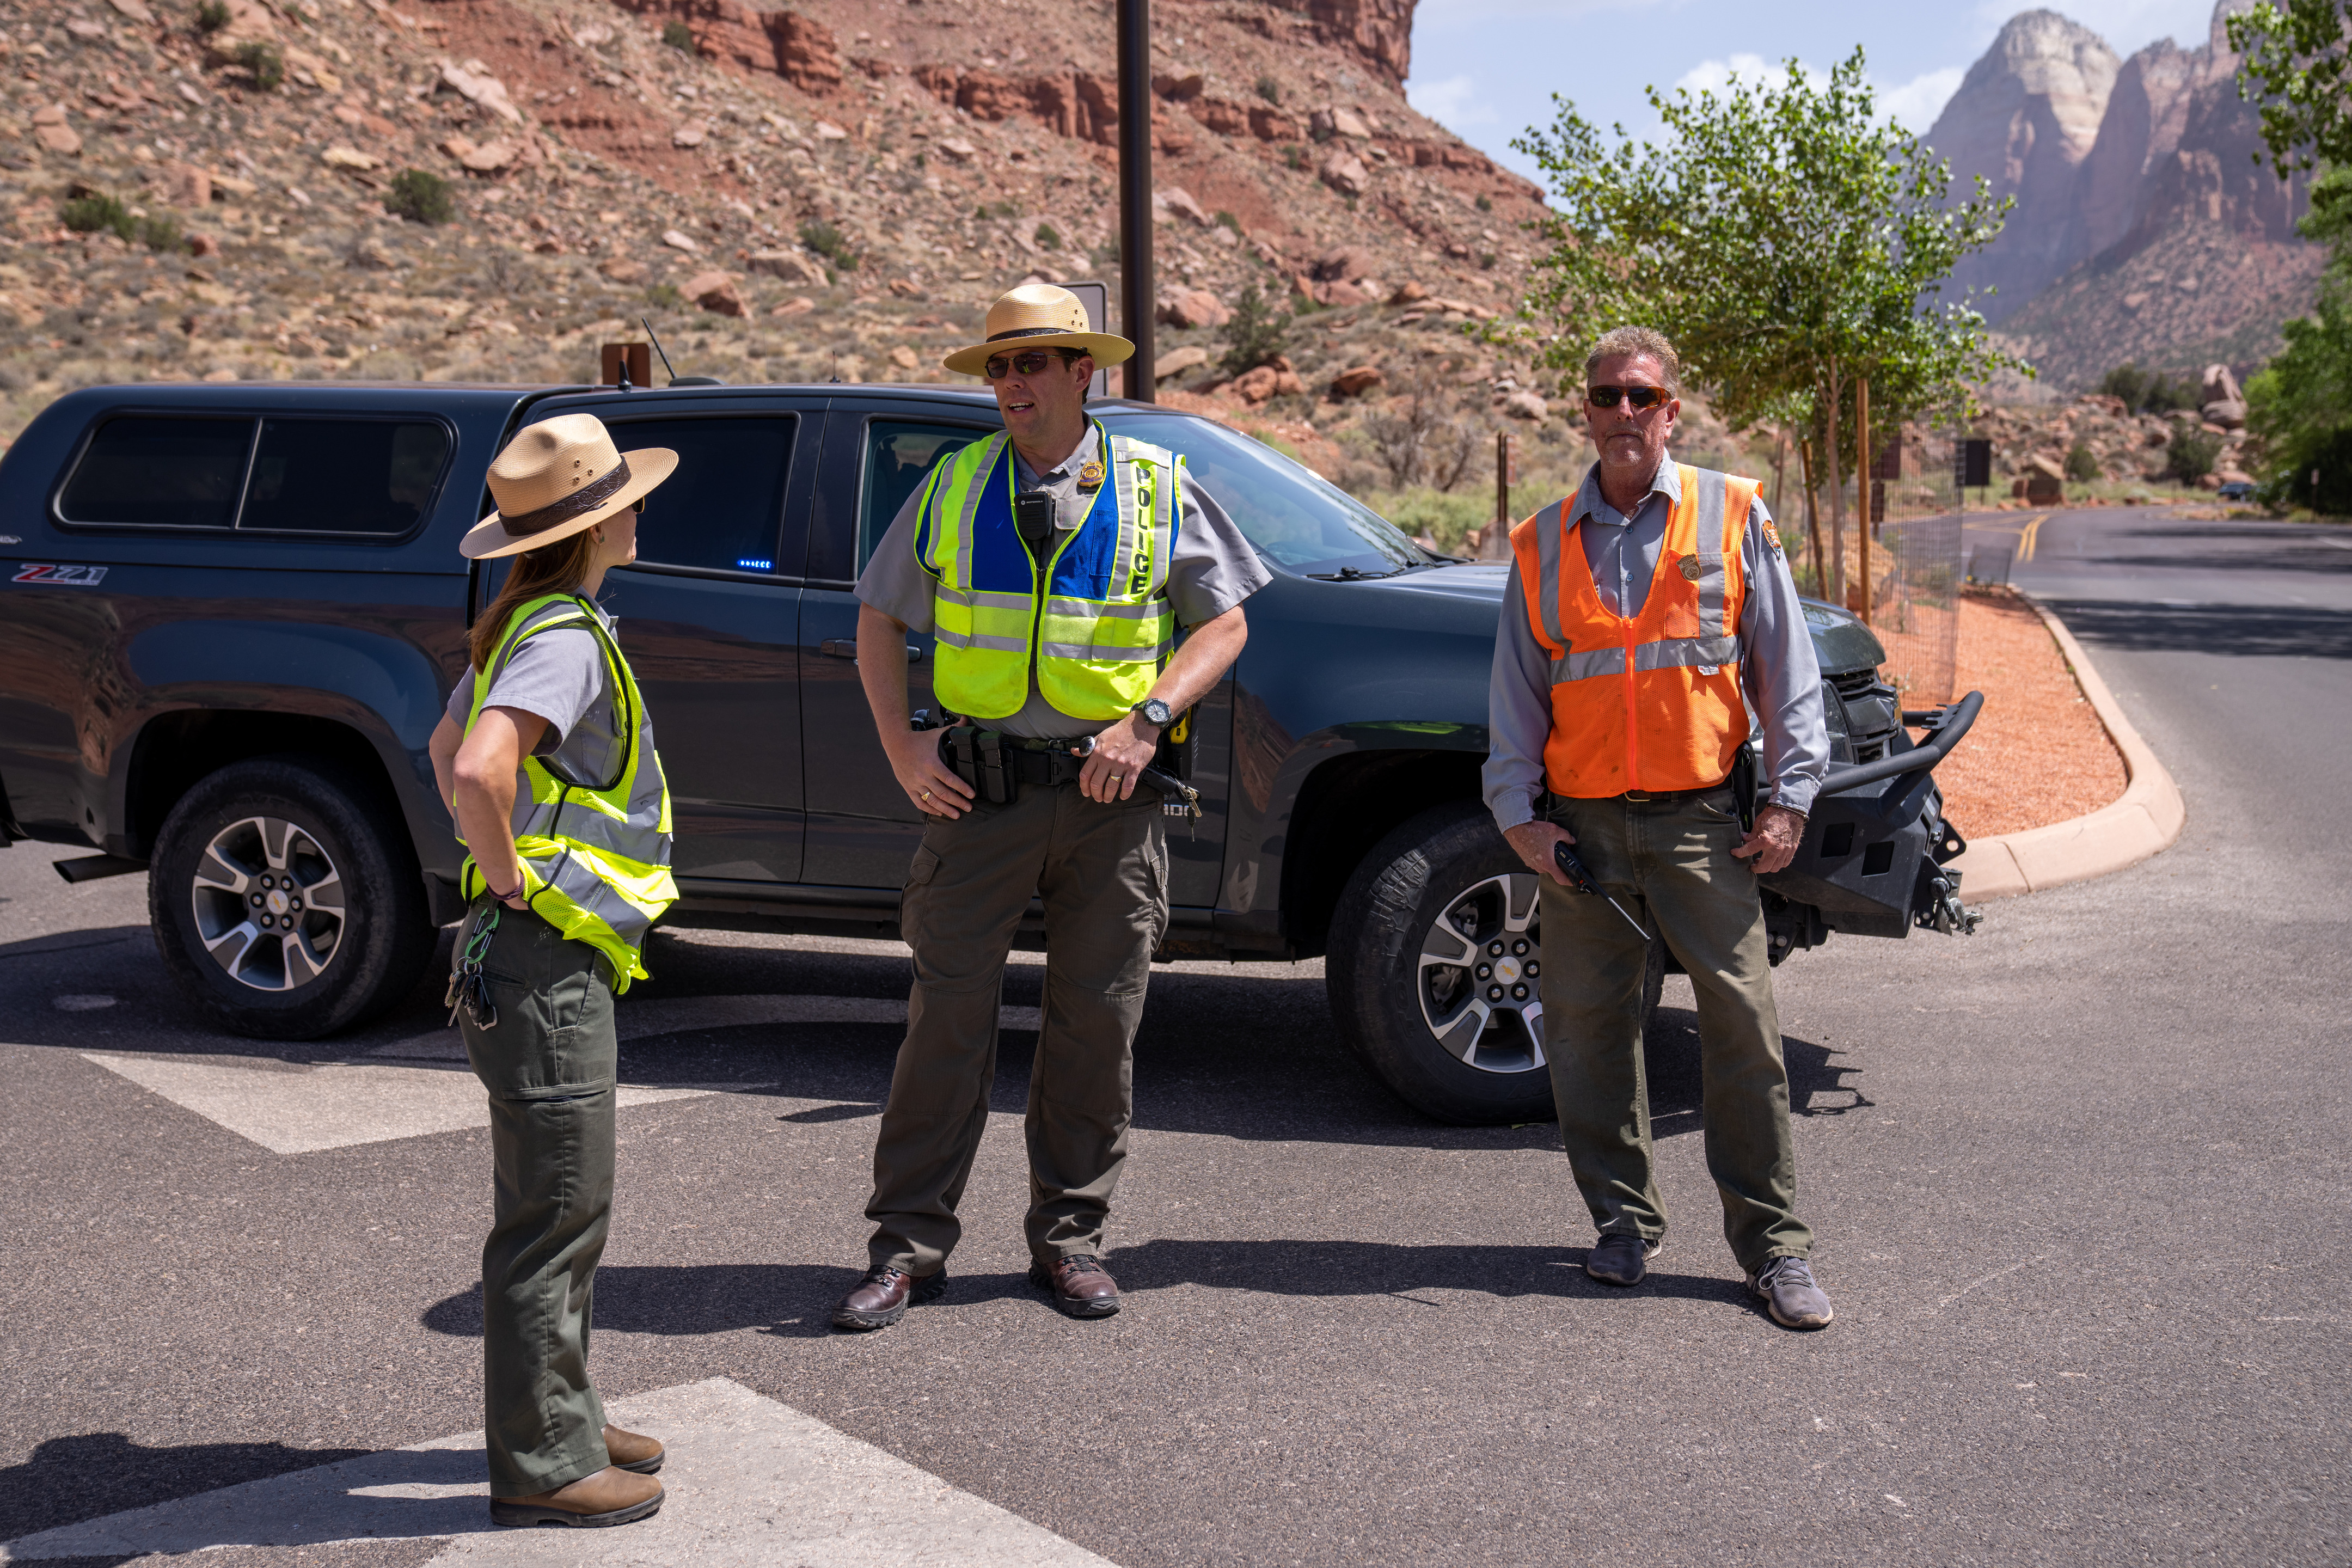 Three National Park Service Staff discuss operations near South Entrance of Zion National Park.